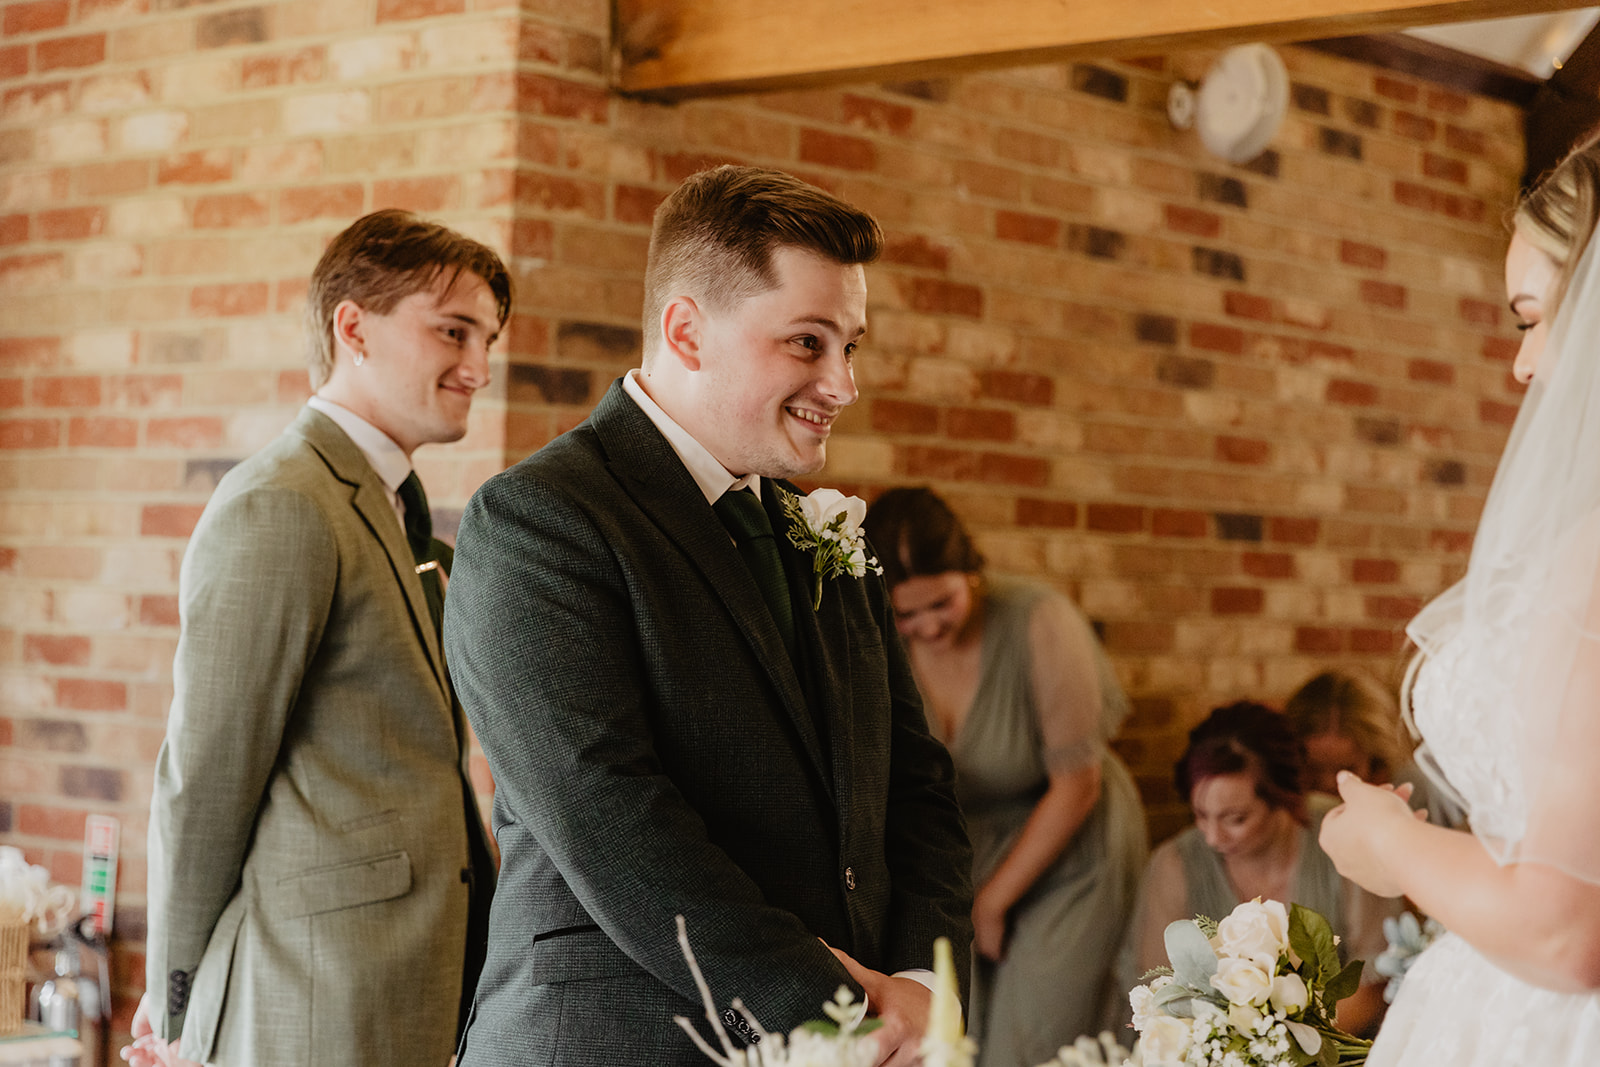 Groom meets bride at a Long Furlong Barn Wedding in Worthing, Sussex. By Olive Joy Photography.